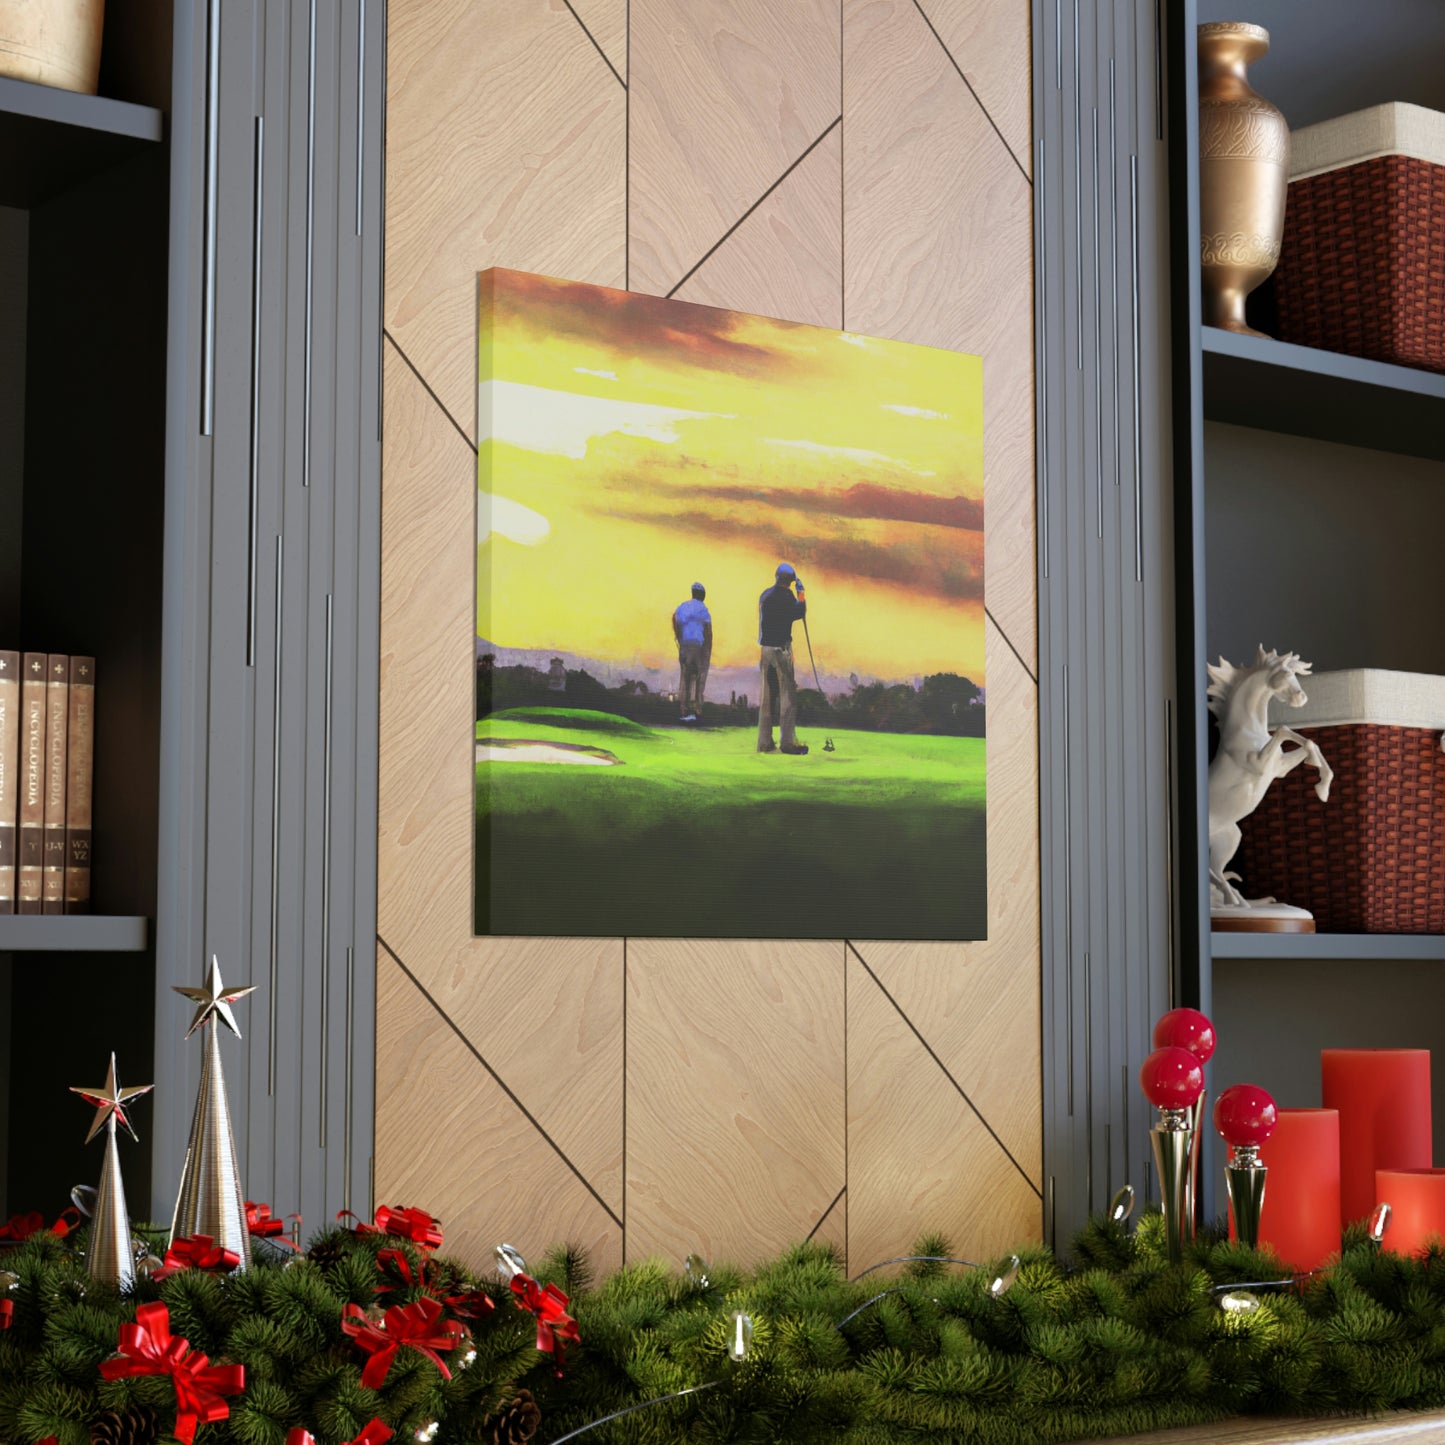 The Golden Hour Swing - Canvas